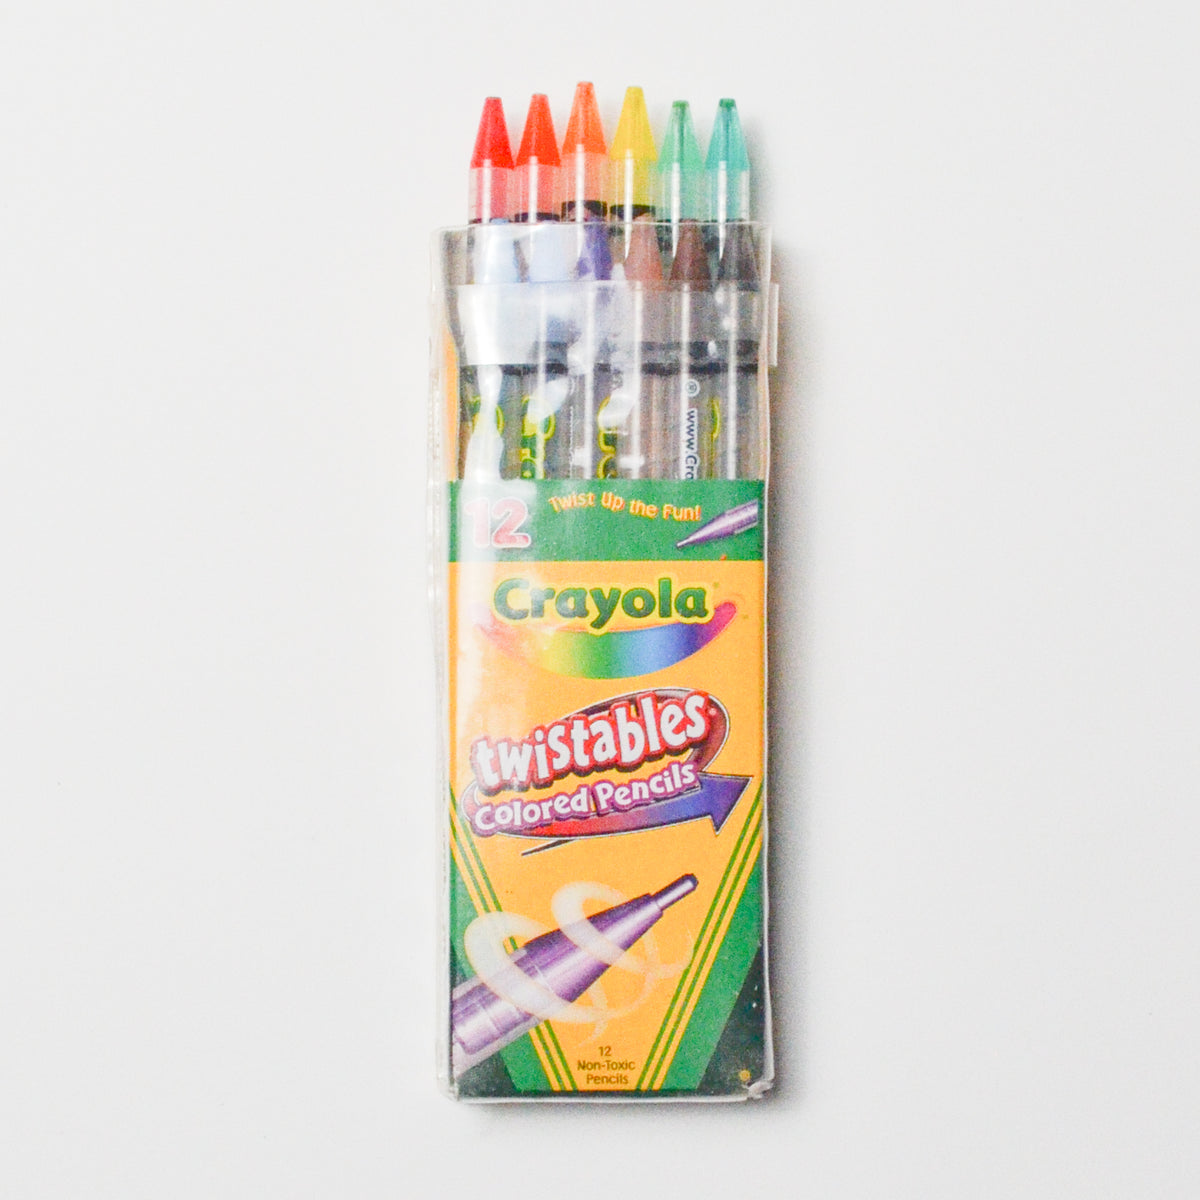 Crayola Colored Pencils - The Crafty Tipster